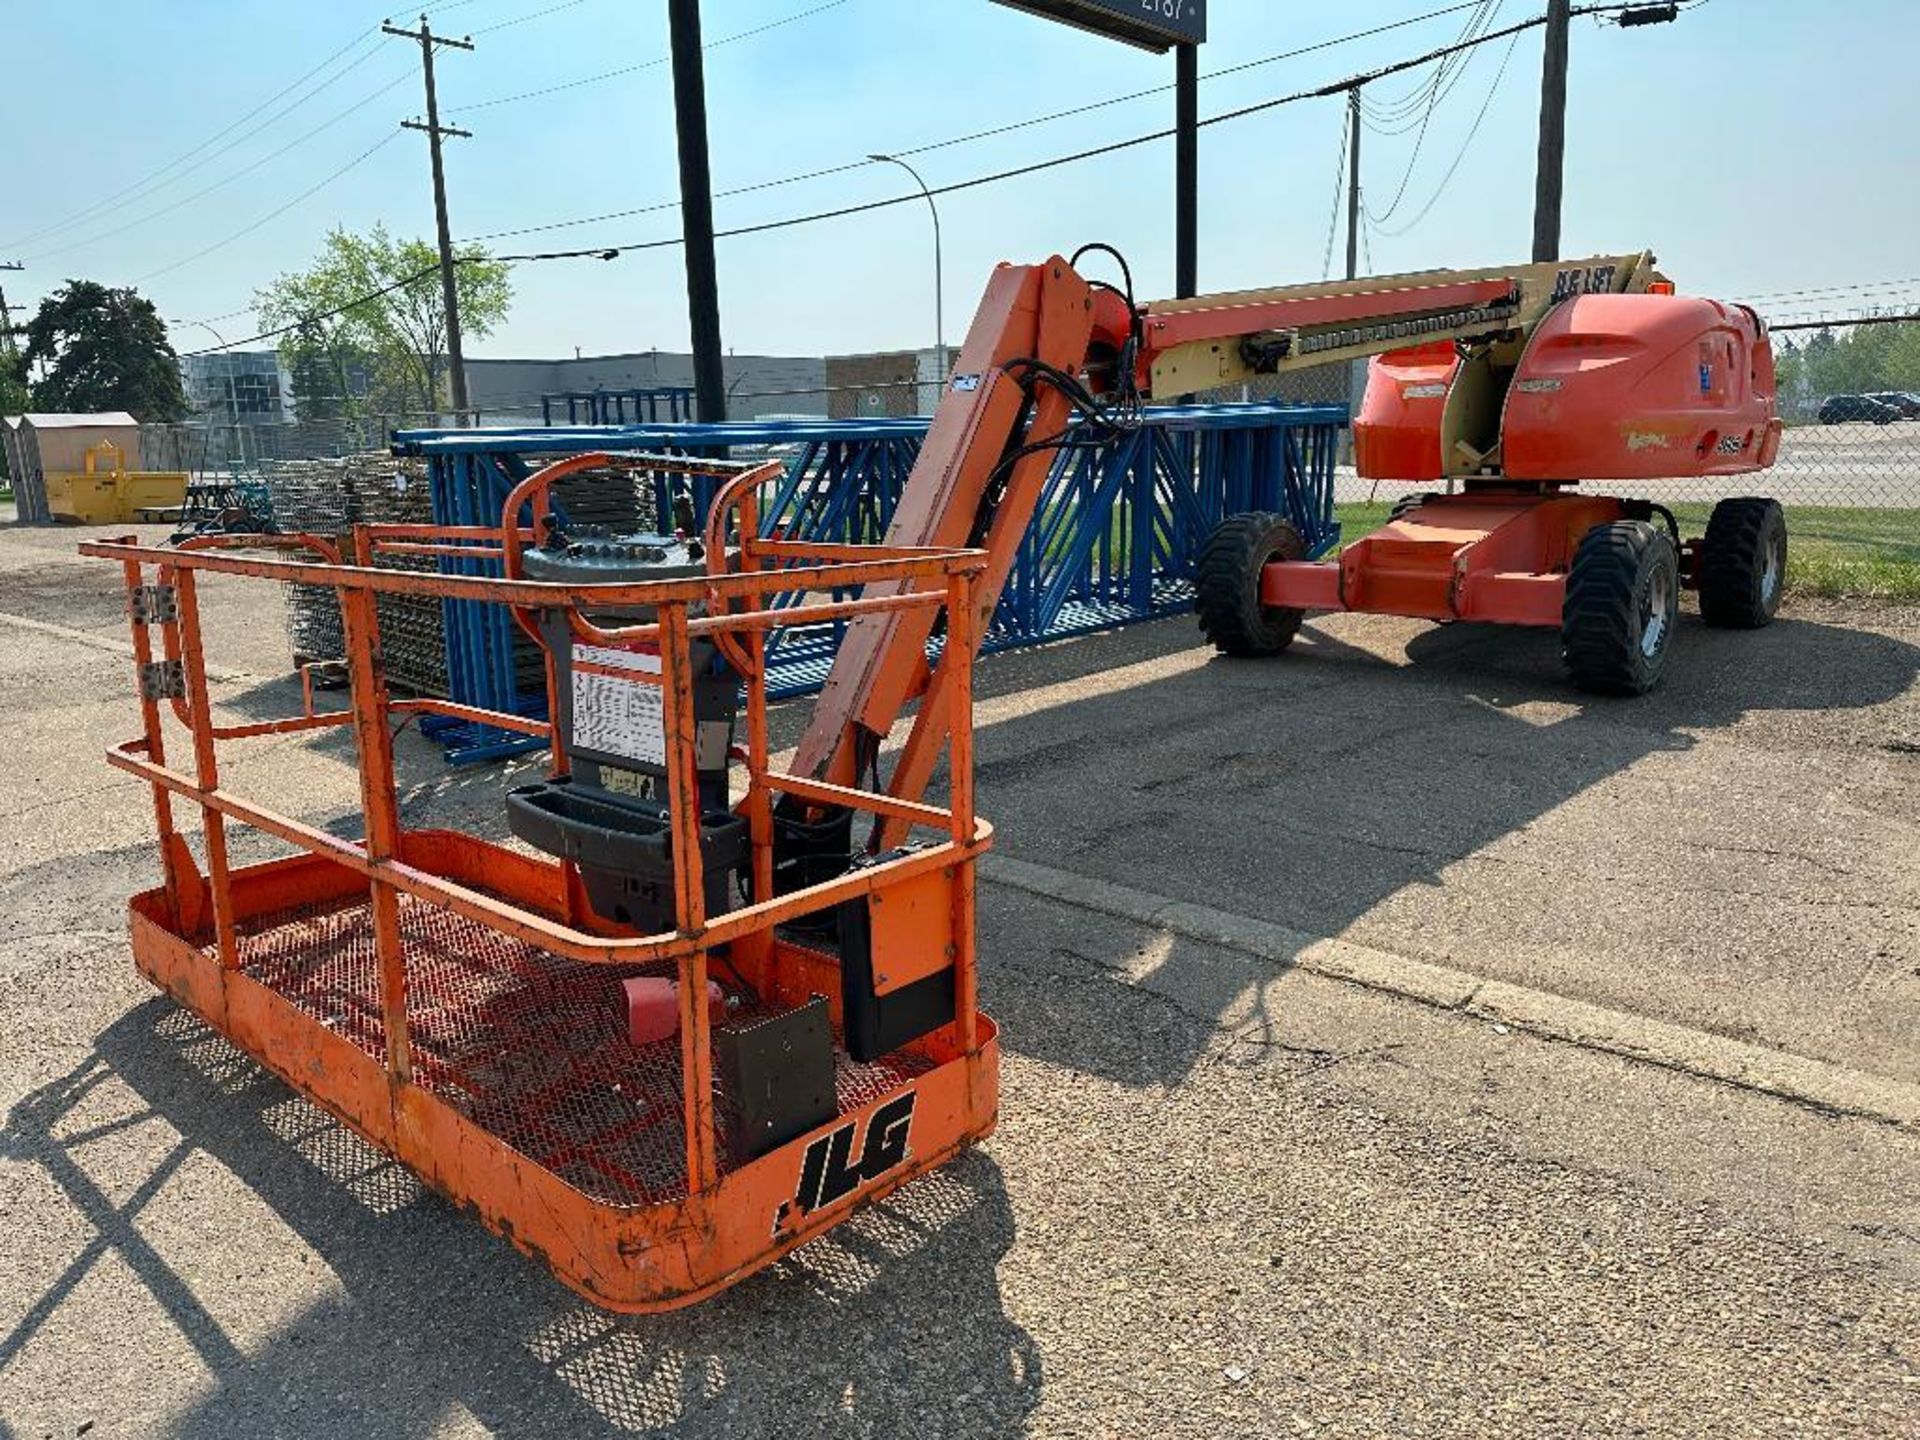 2011 JLG 460SJ Telescopic Boom Lift, 3,975hrs Showing, 48' Max Height, 40.5' Max Reach - Image 4 of 13